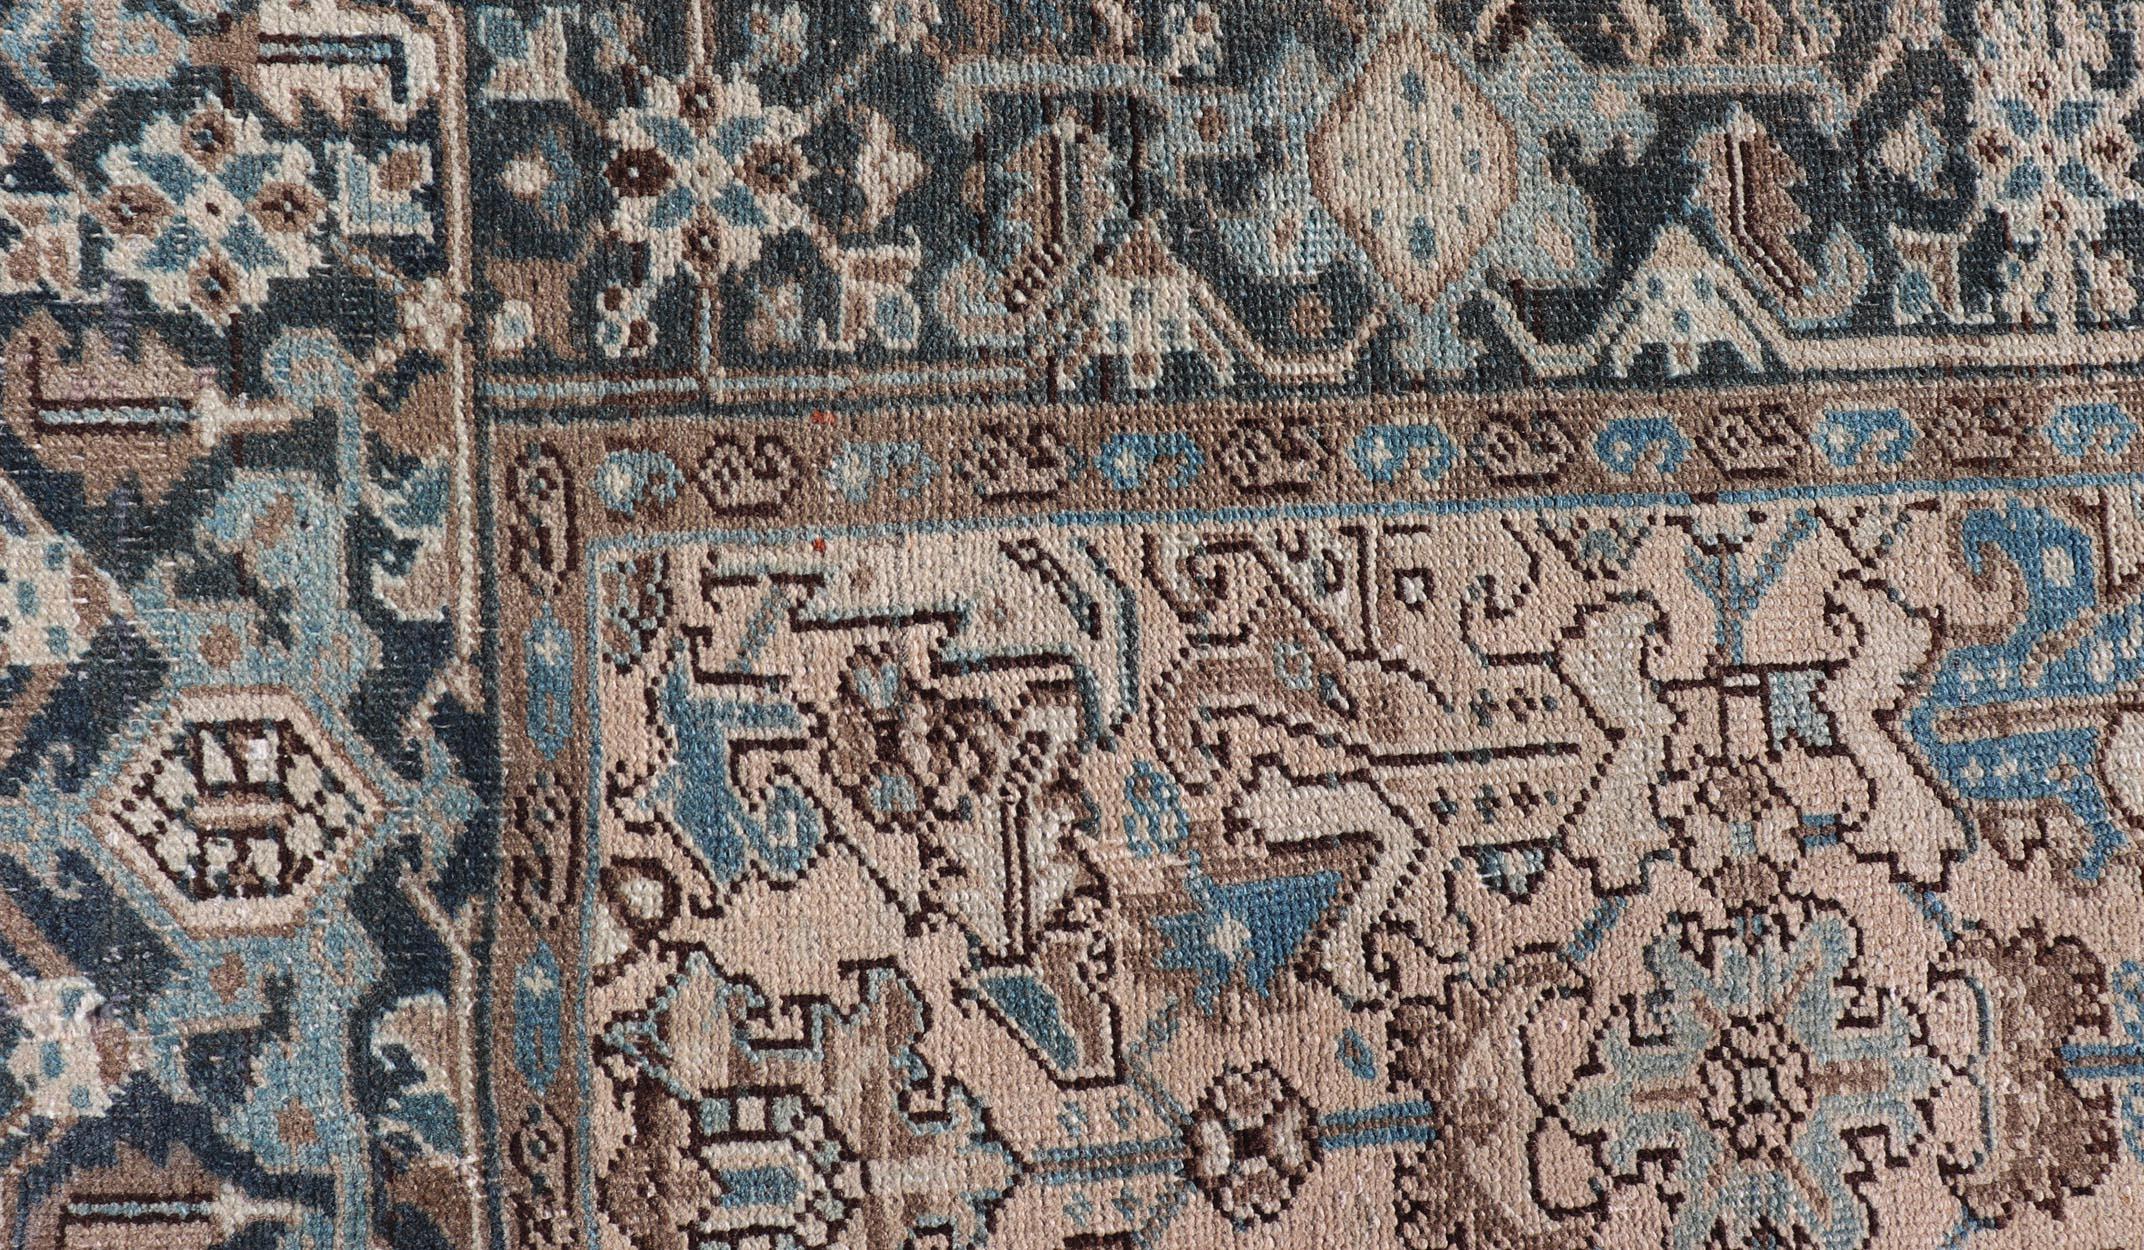 Square size Persian Heriz rug with all-over sub floral design in brown & blue in neutral and earth colors. Keivan Woven Arts / rug VAS-51321, country of origin / type: Iran / Heriz, circa Mid-20th Century. 

Measures: 6'10 x 8'0
 
This